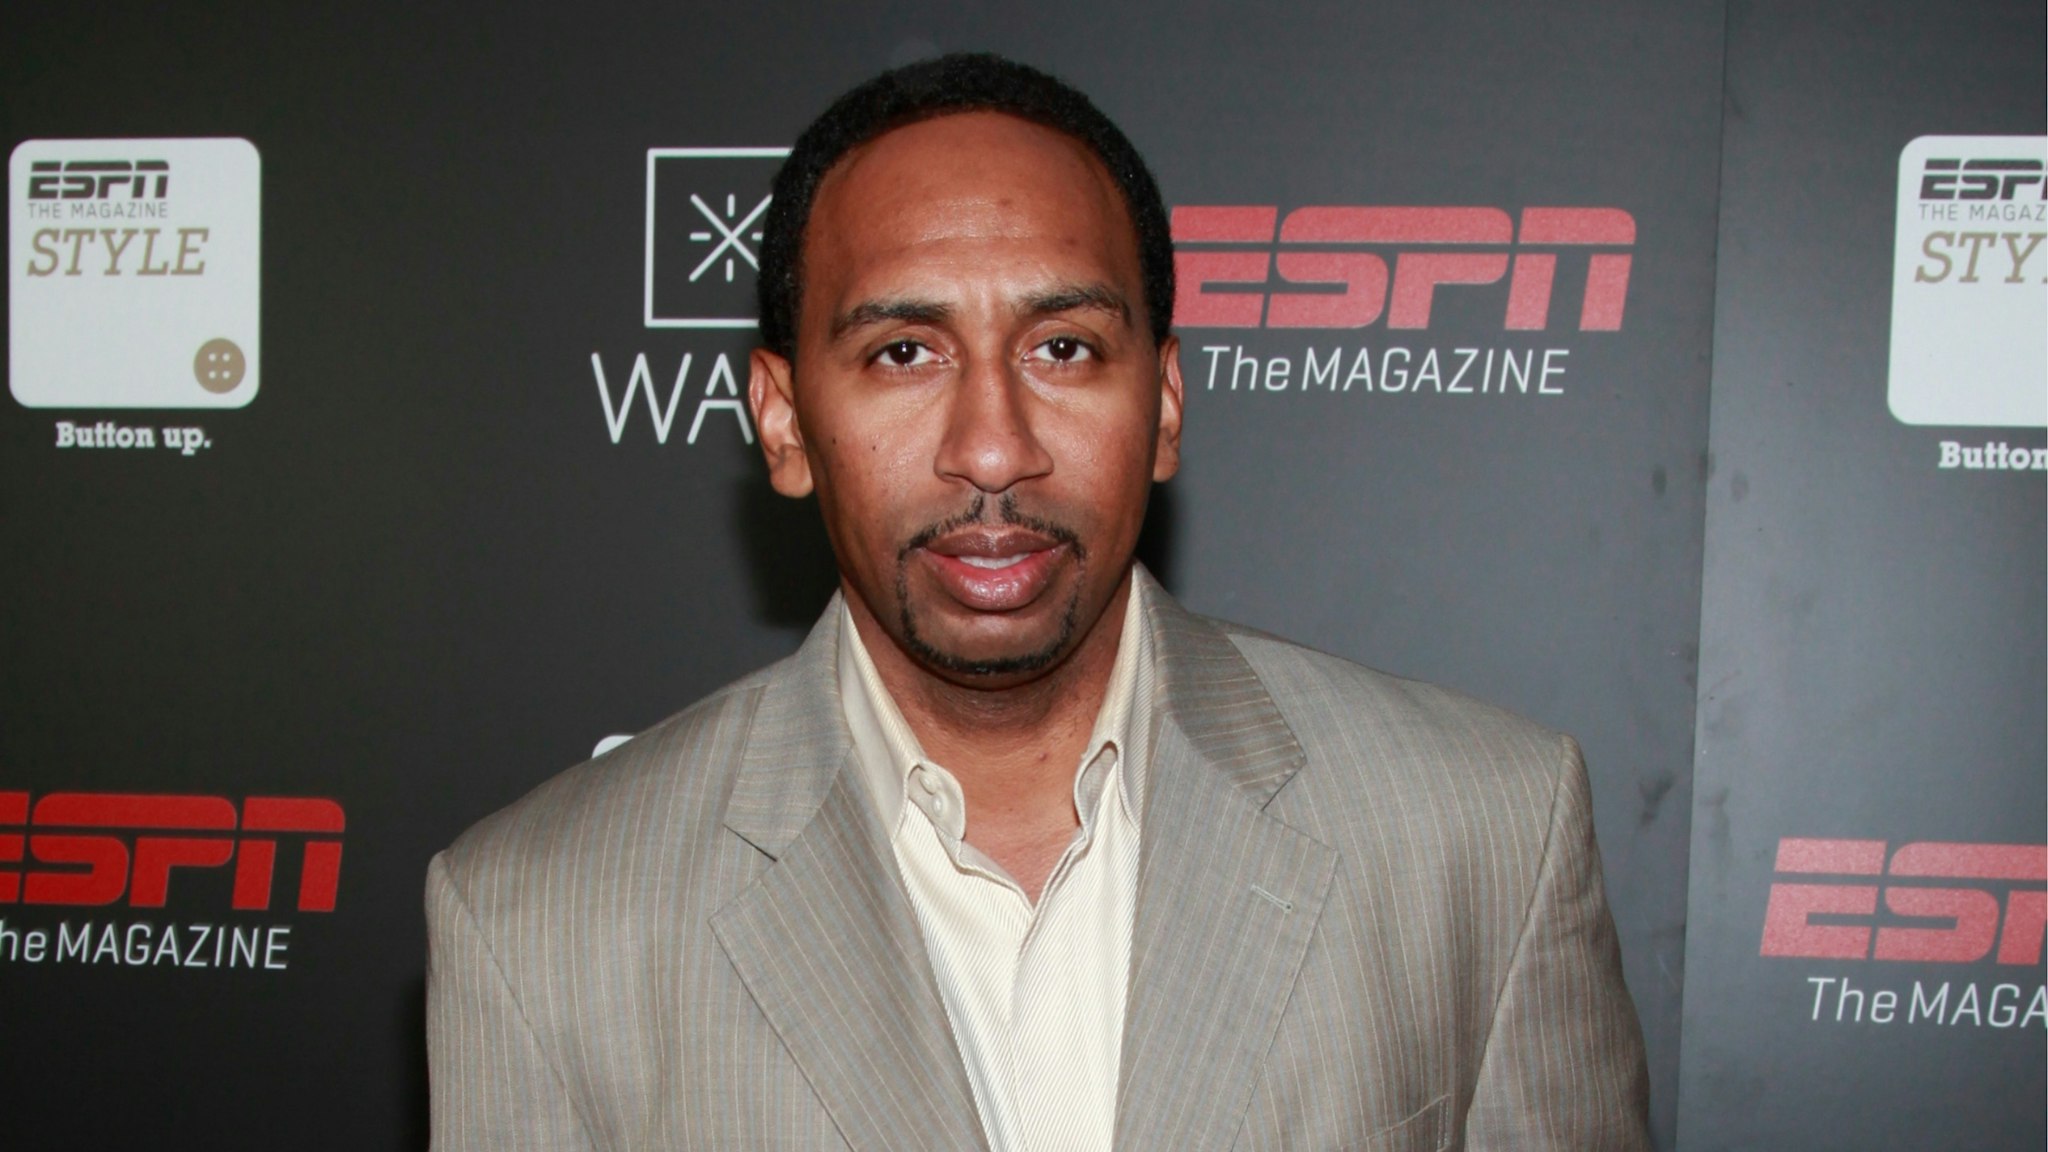 TV personality Stephen A. Smith attends the Dwyane Wade Book Launch Celebration With ESPN The Magazine at Jazz at Lincoln Center on September 4, 2012 in New York City.